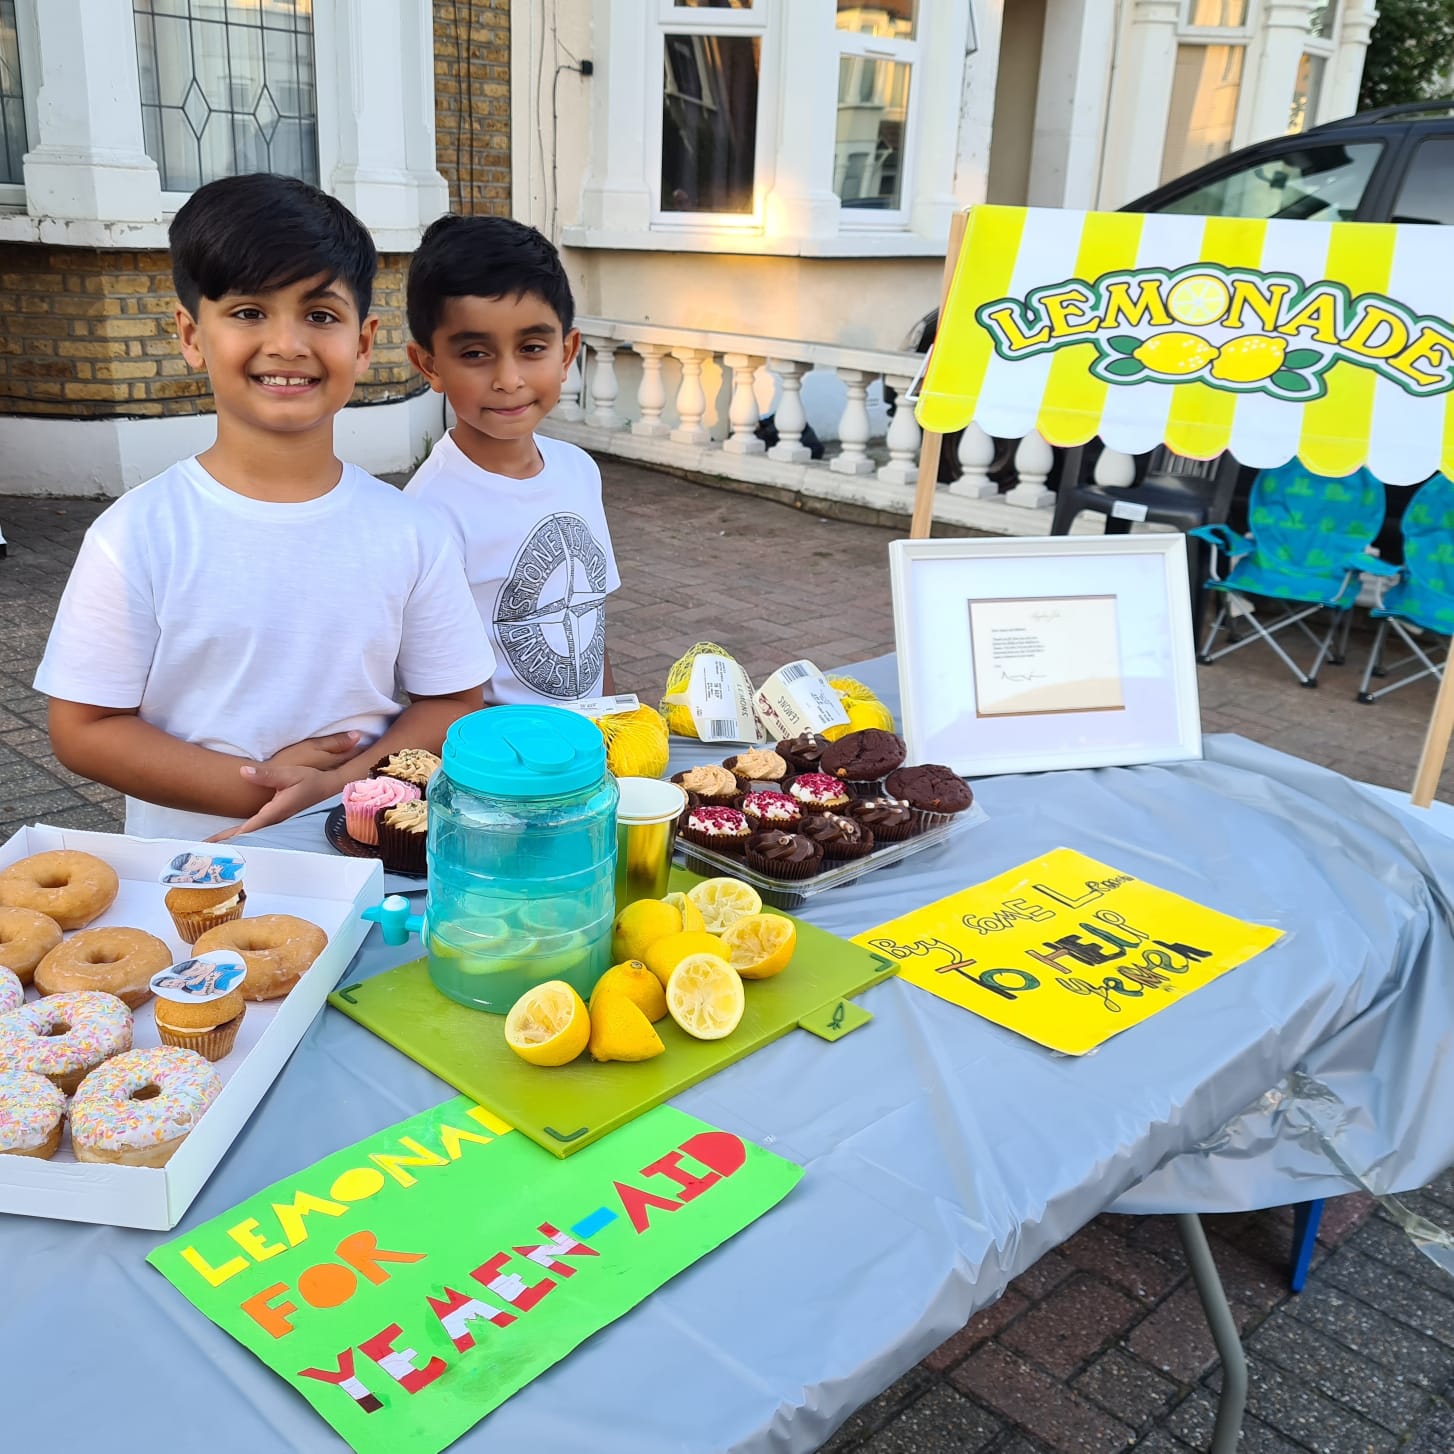 Mikaeel Ishaaq (right) and Ayaan Moosa have been raising money for causes with their lemonade